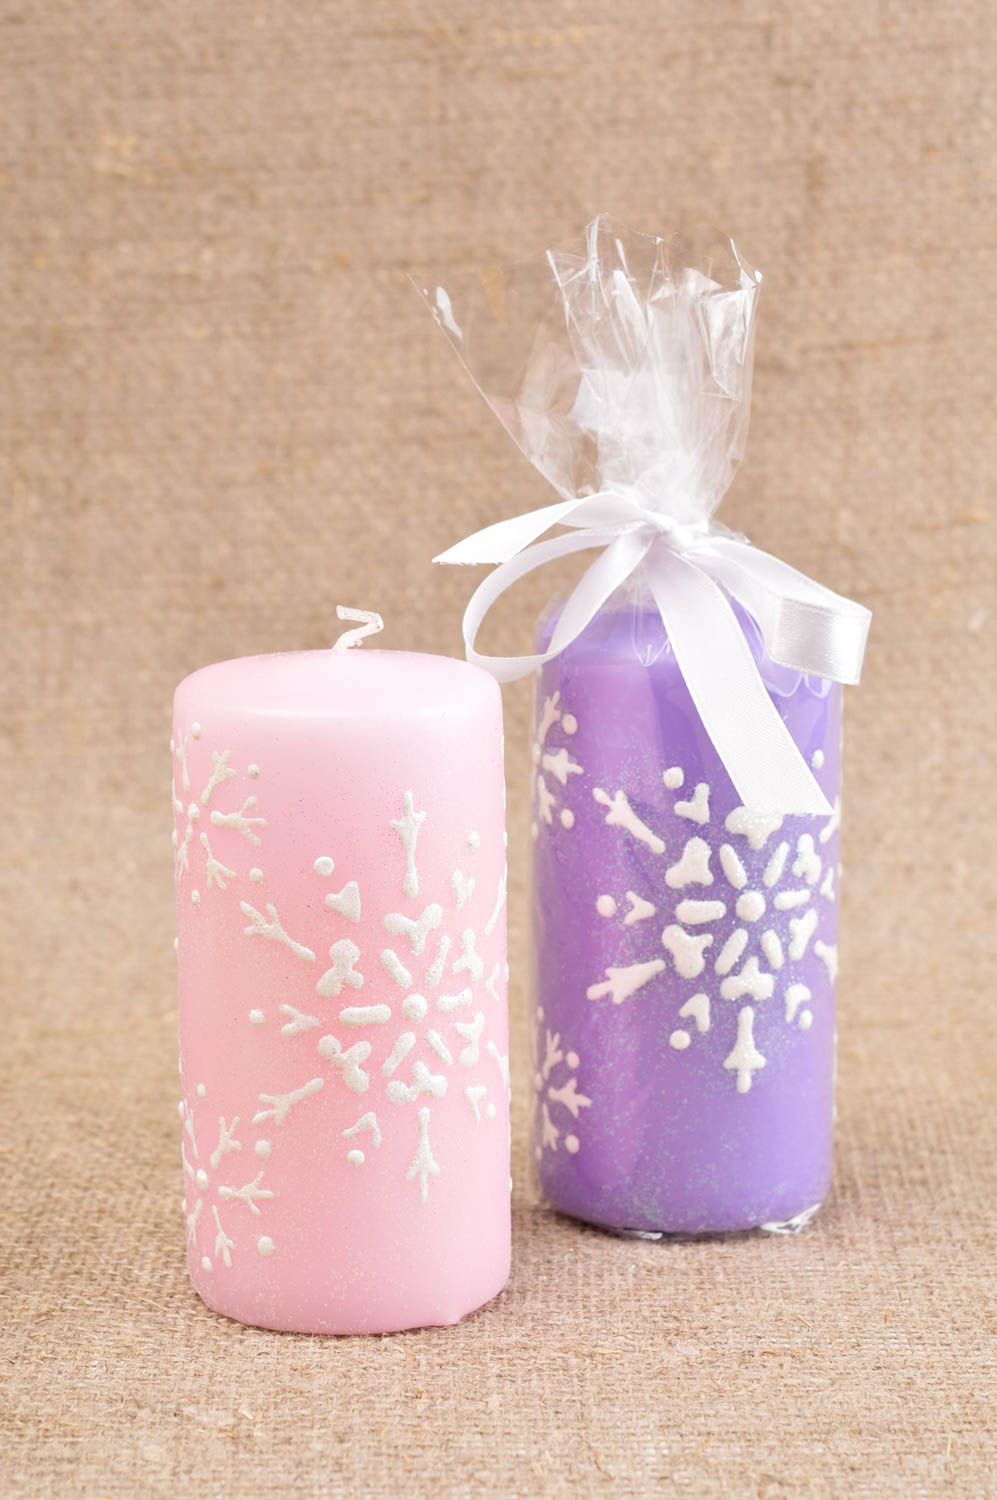 Handmade aroma candle designs festive candles home decoration gift ideas photo 4